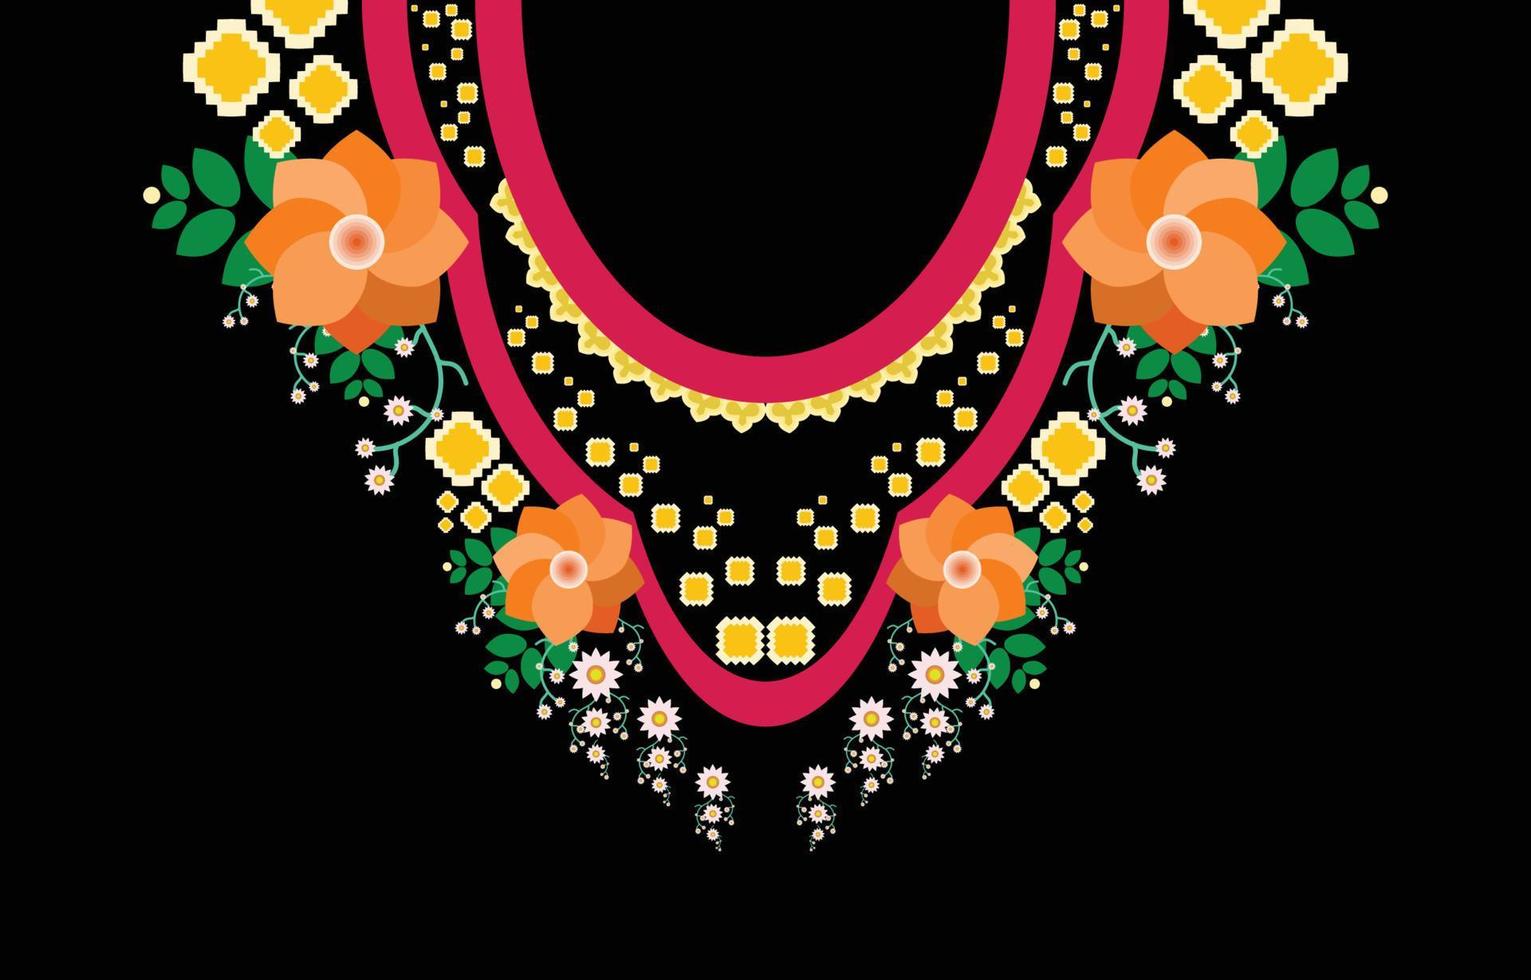 Necklace Geometric Ethnic oriental pattern traditional .flower embroidery design for fashion women.background,wallpaper,clothing and wrapping. vector